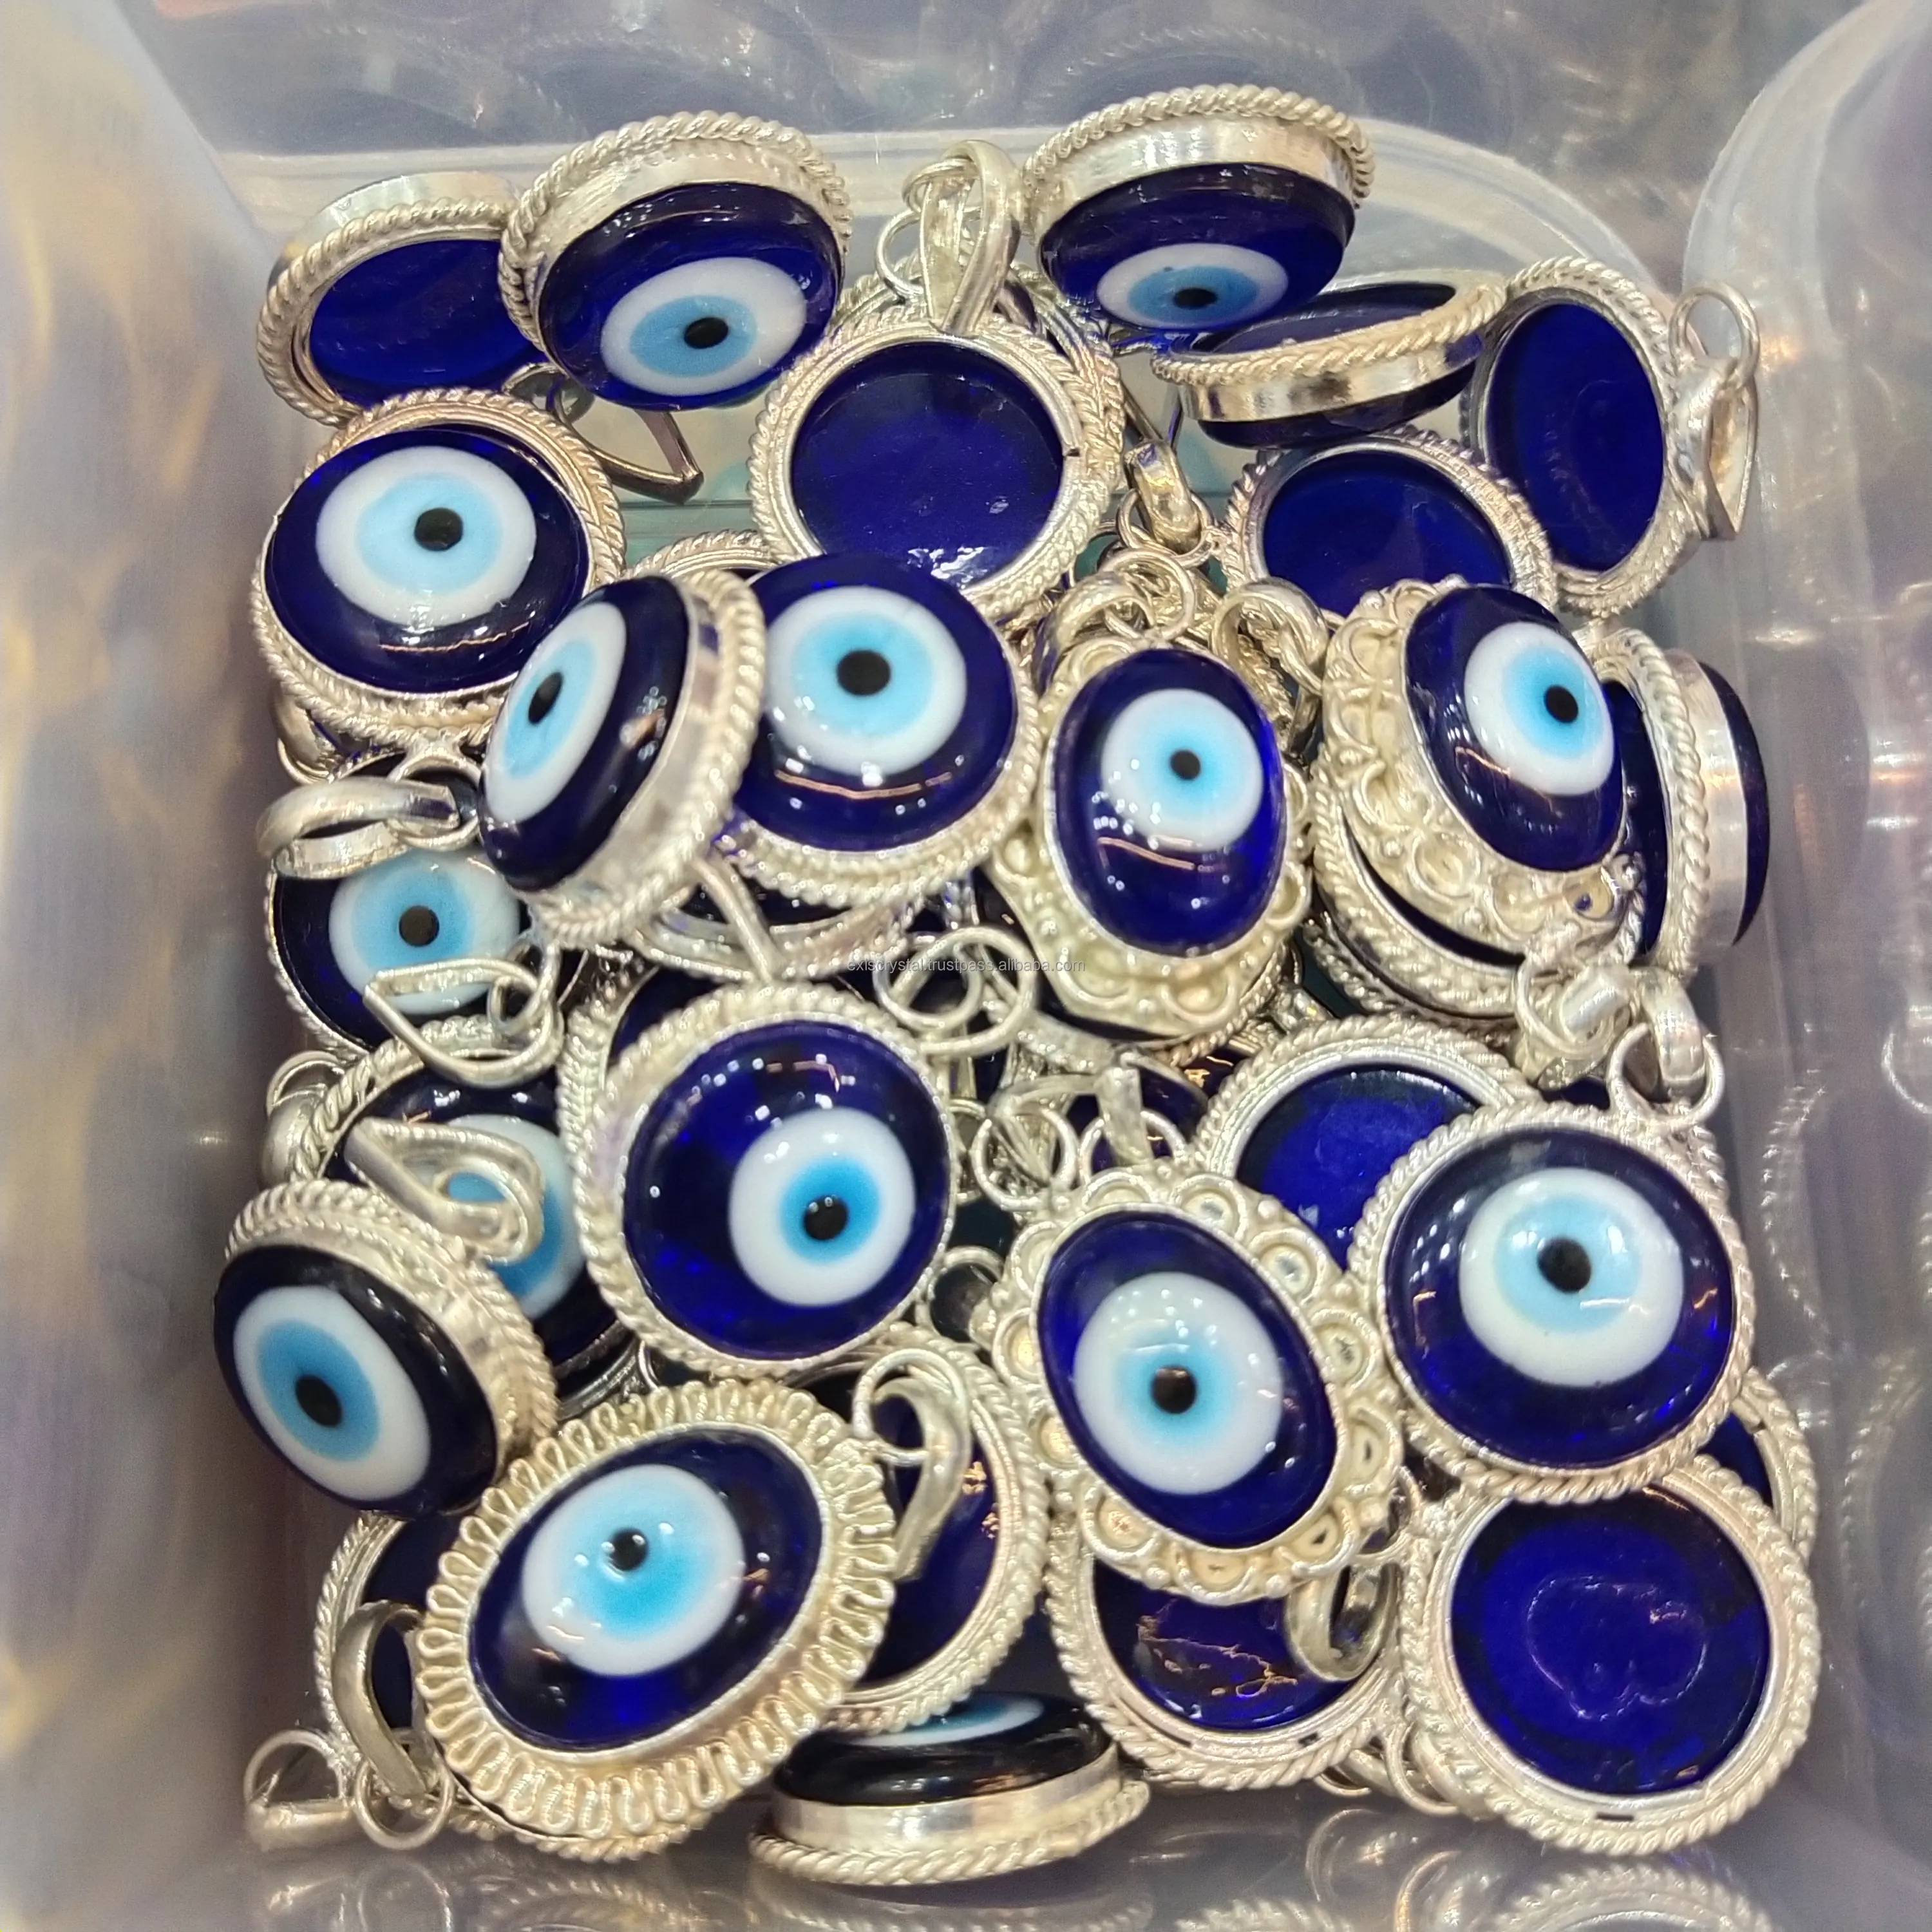 Amazon Fashion Jewelry Pendant European Style Blue Turkey Evil Eyes Beads Alloy Charm From Exis Crystal Exports